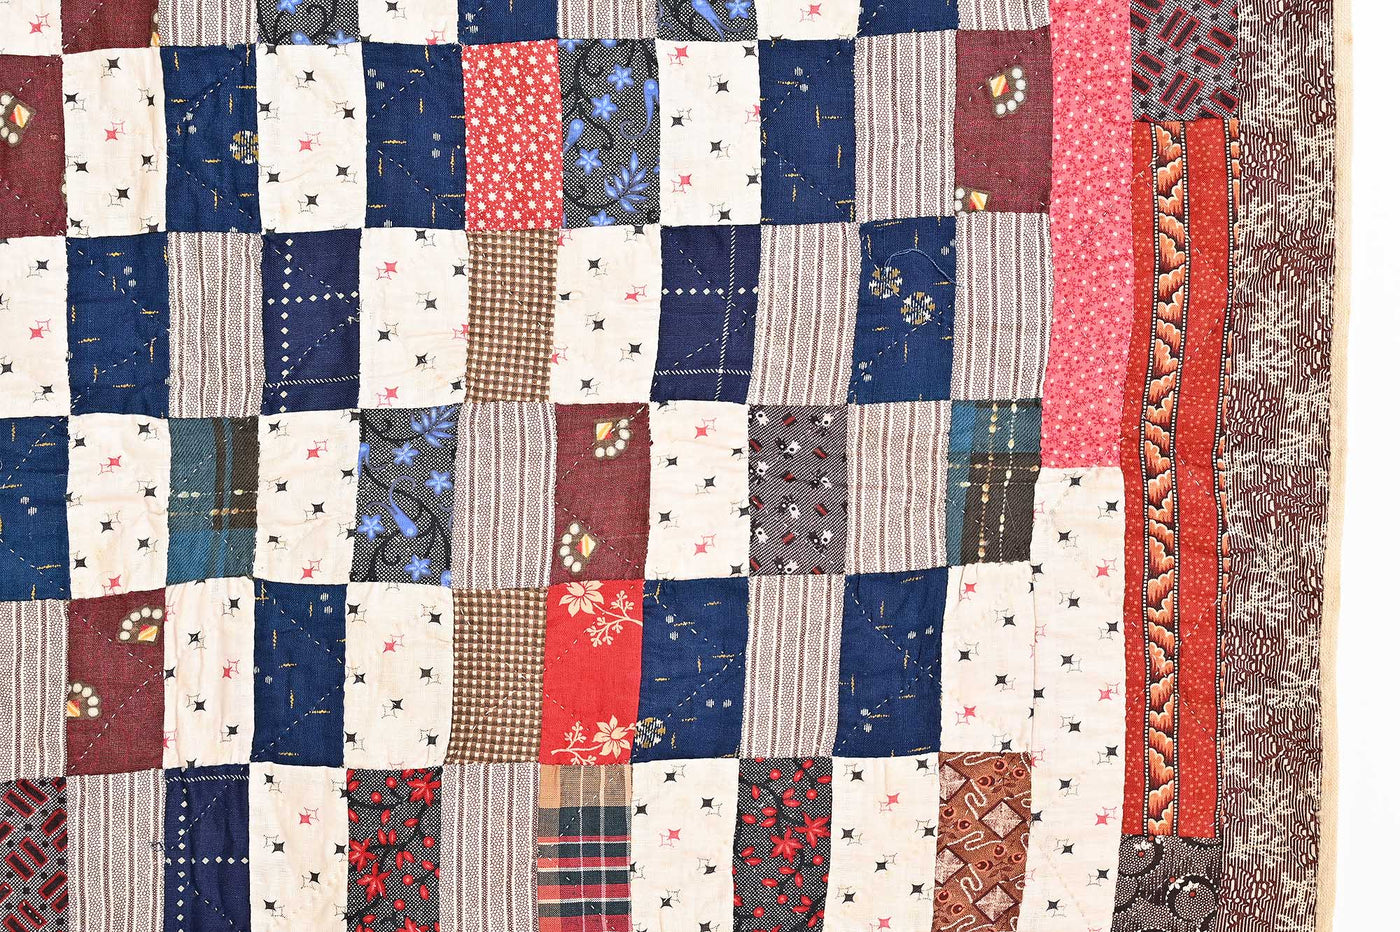 Stitching and patch close up of 19th century Calico One Patch Rectangles Quilt.